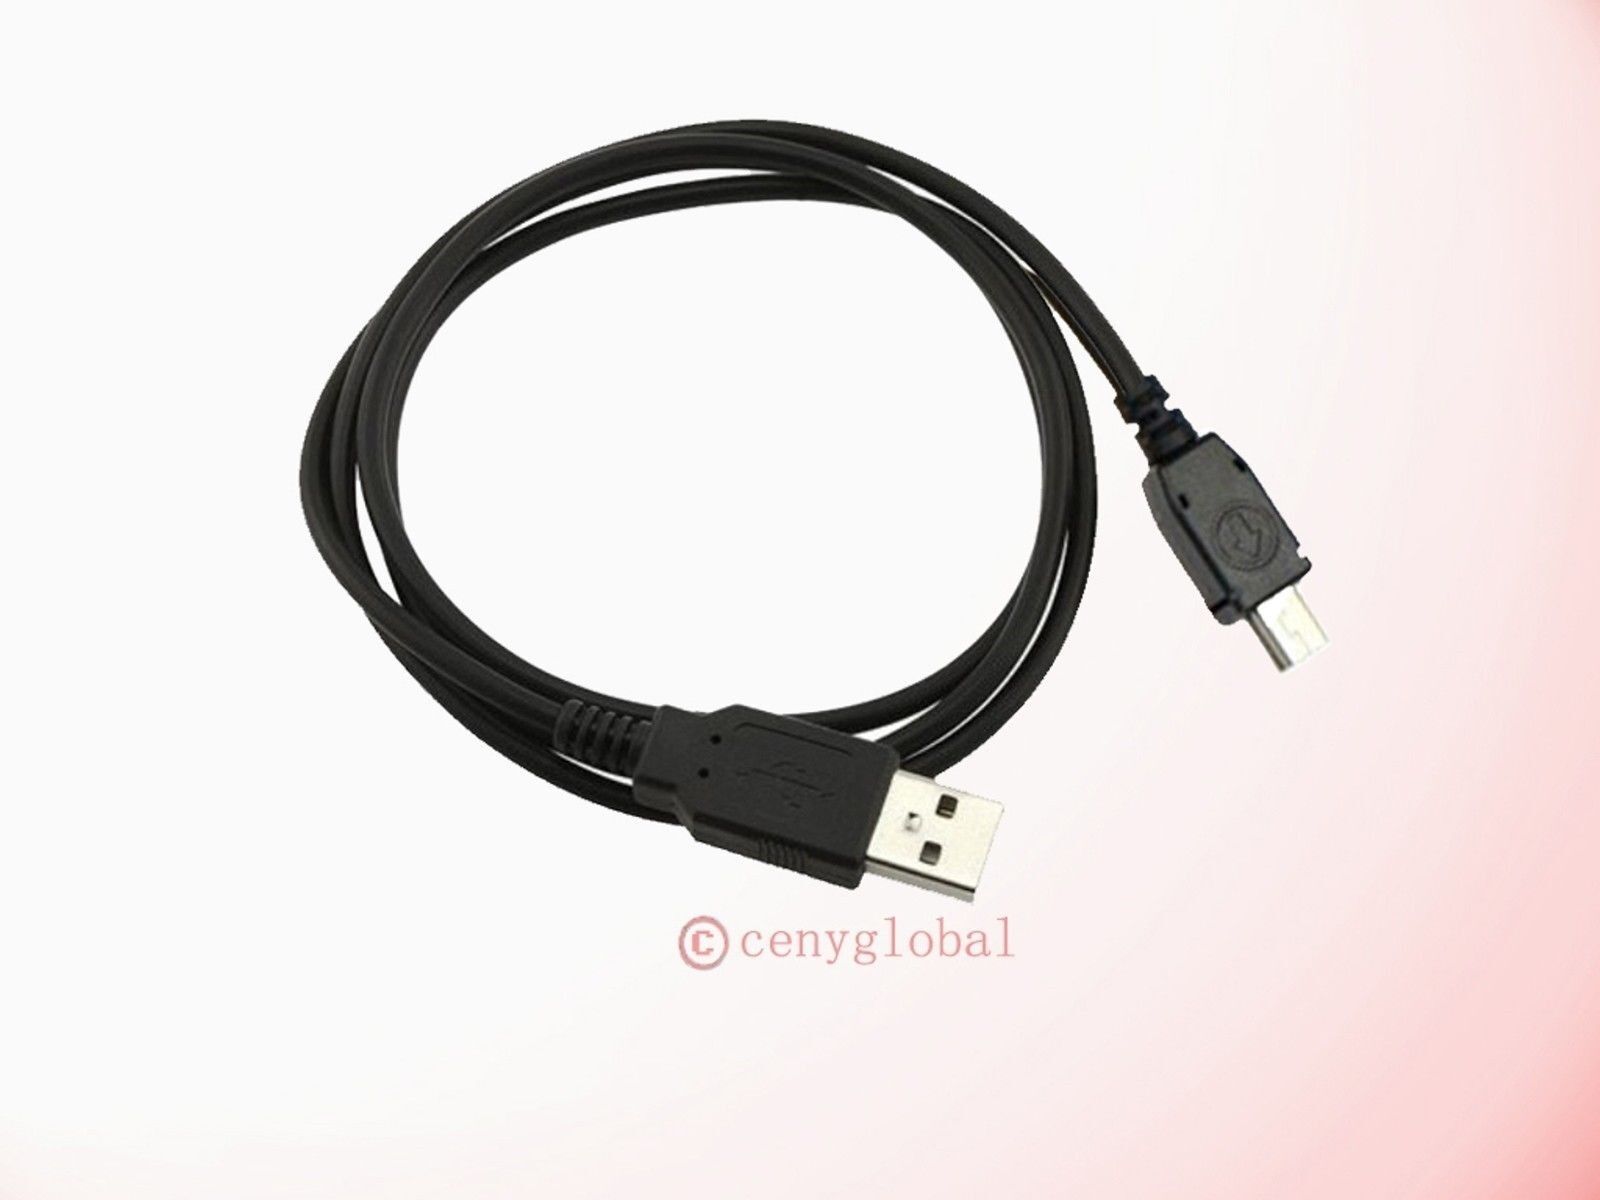 USB PC Power Cable Cord For OTC 3111Pro Scan Tool OBD II CAN ABS Airbag OBD2